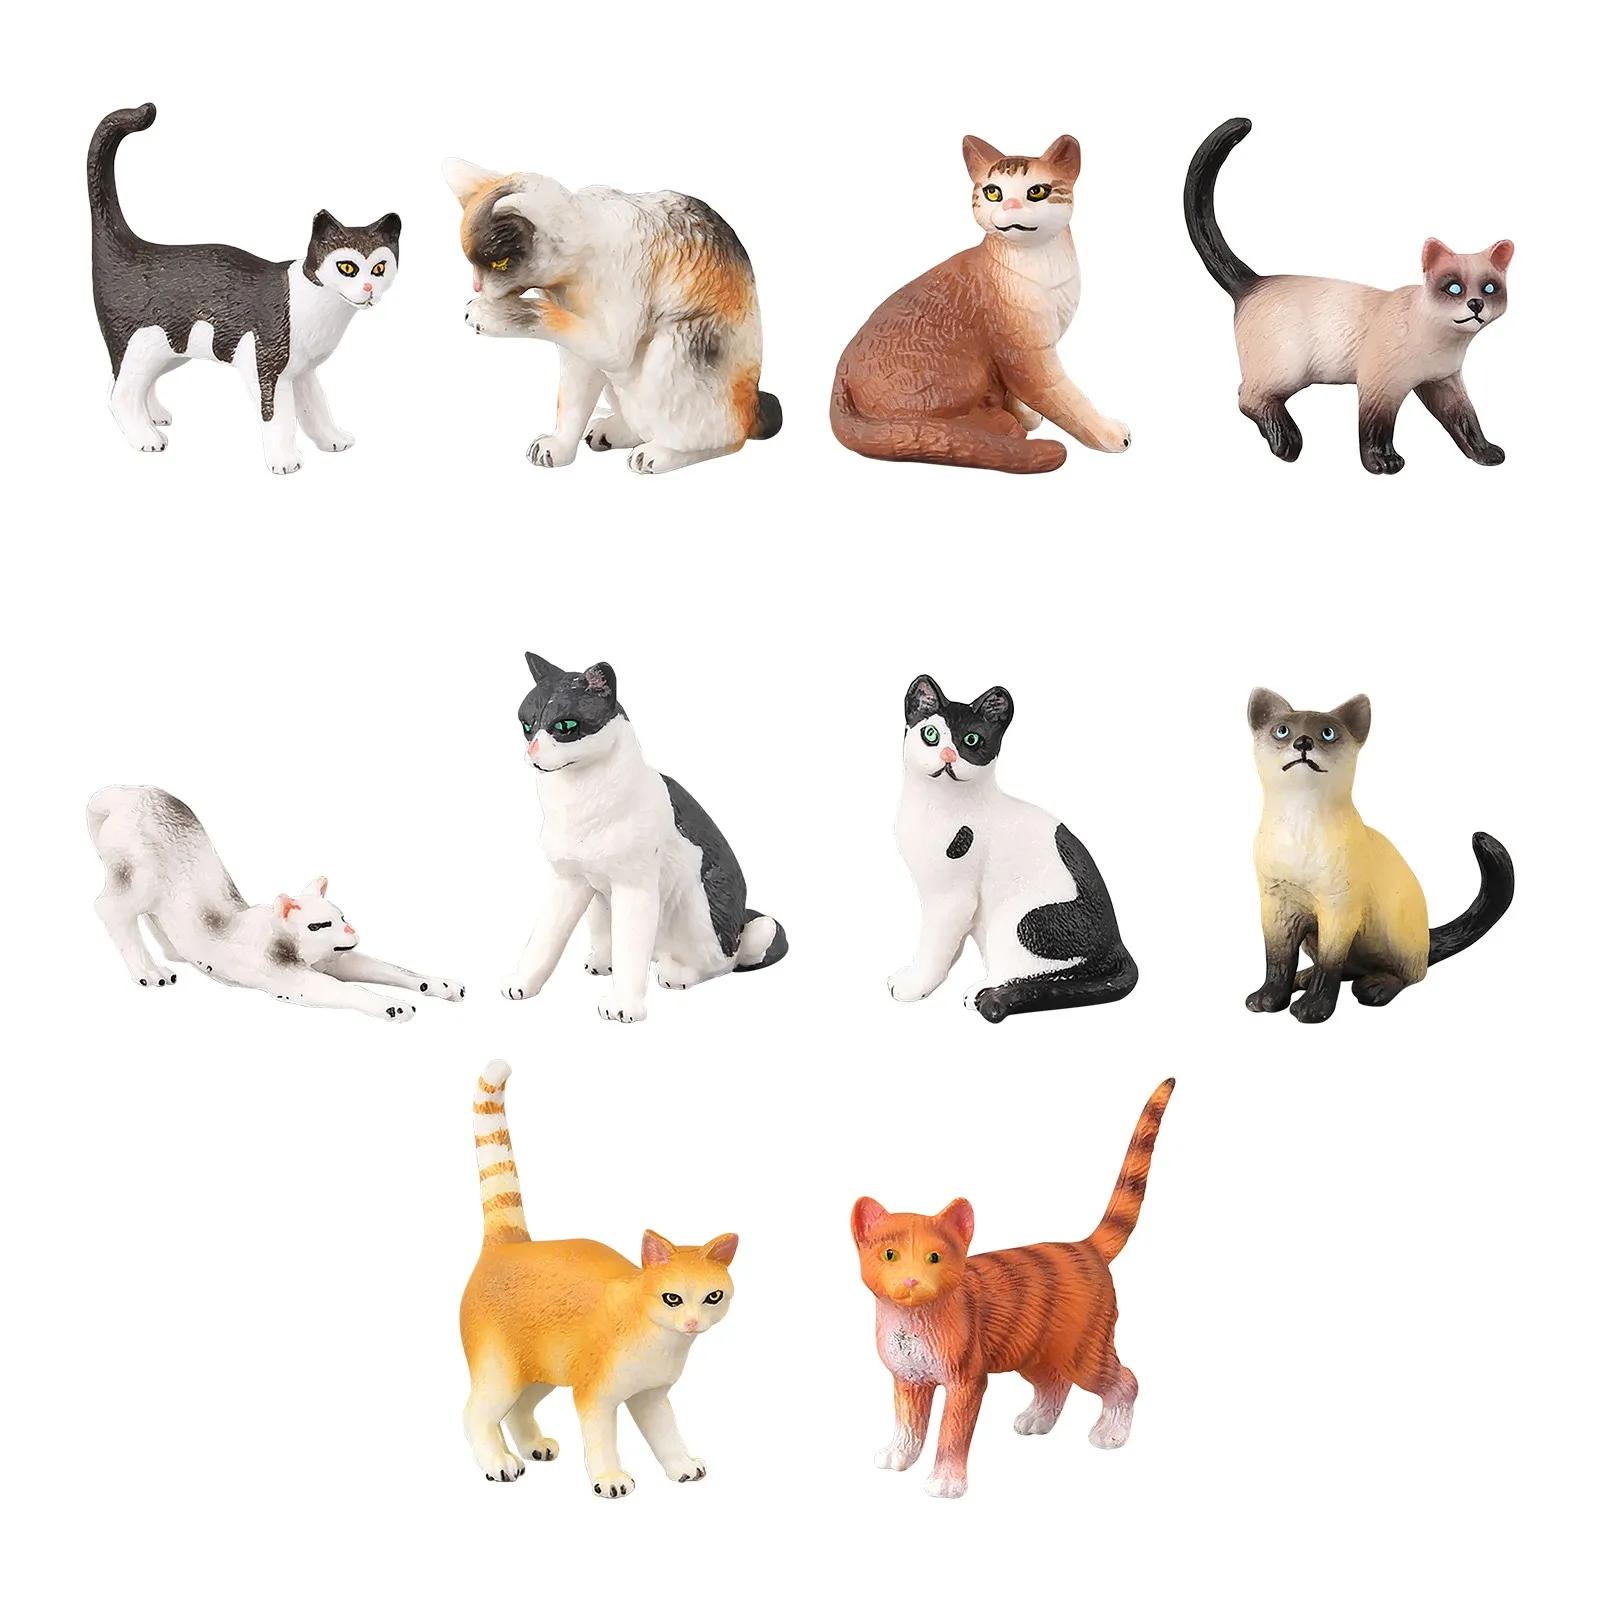 

Simulation Cat Toys Kids Childrens Pet Model Figure Animal Plastic Action Figures Funny Toy Gift Doll Home Decor Cats Figurine